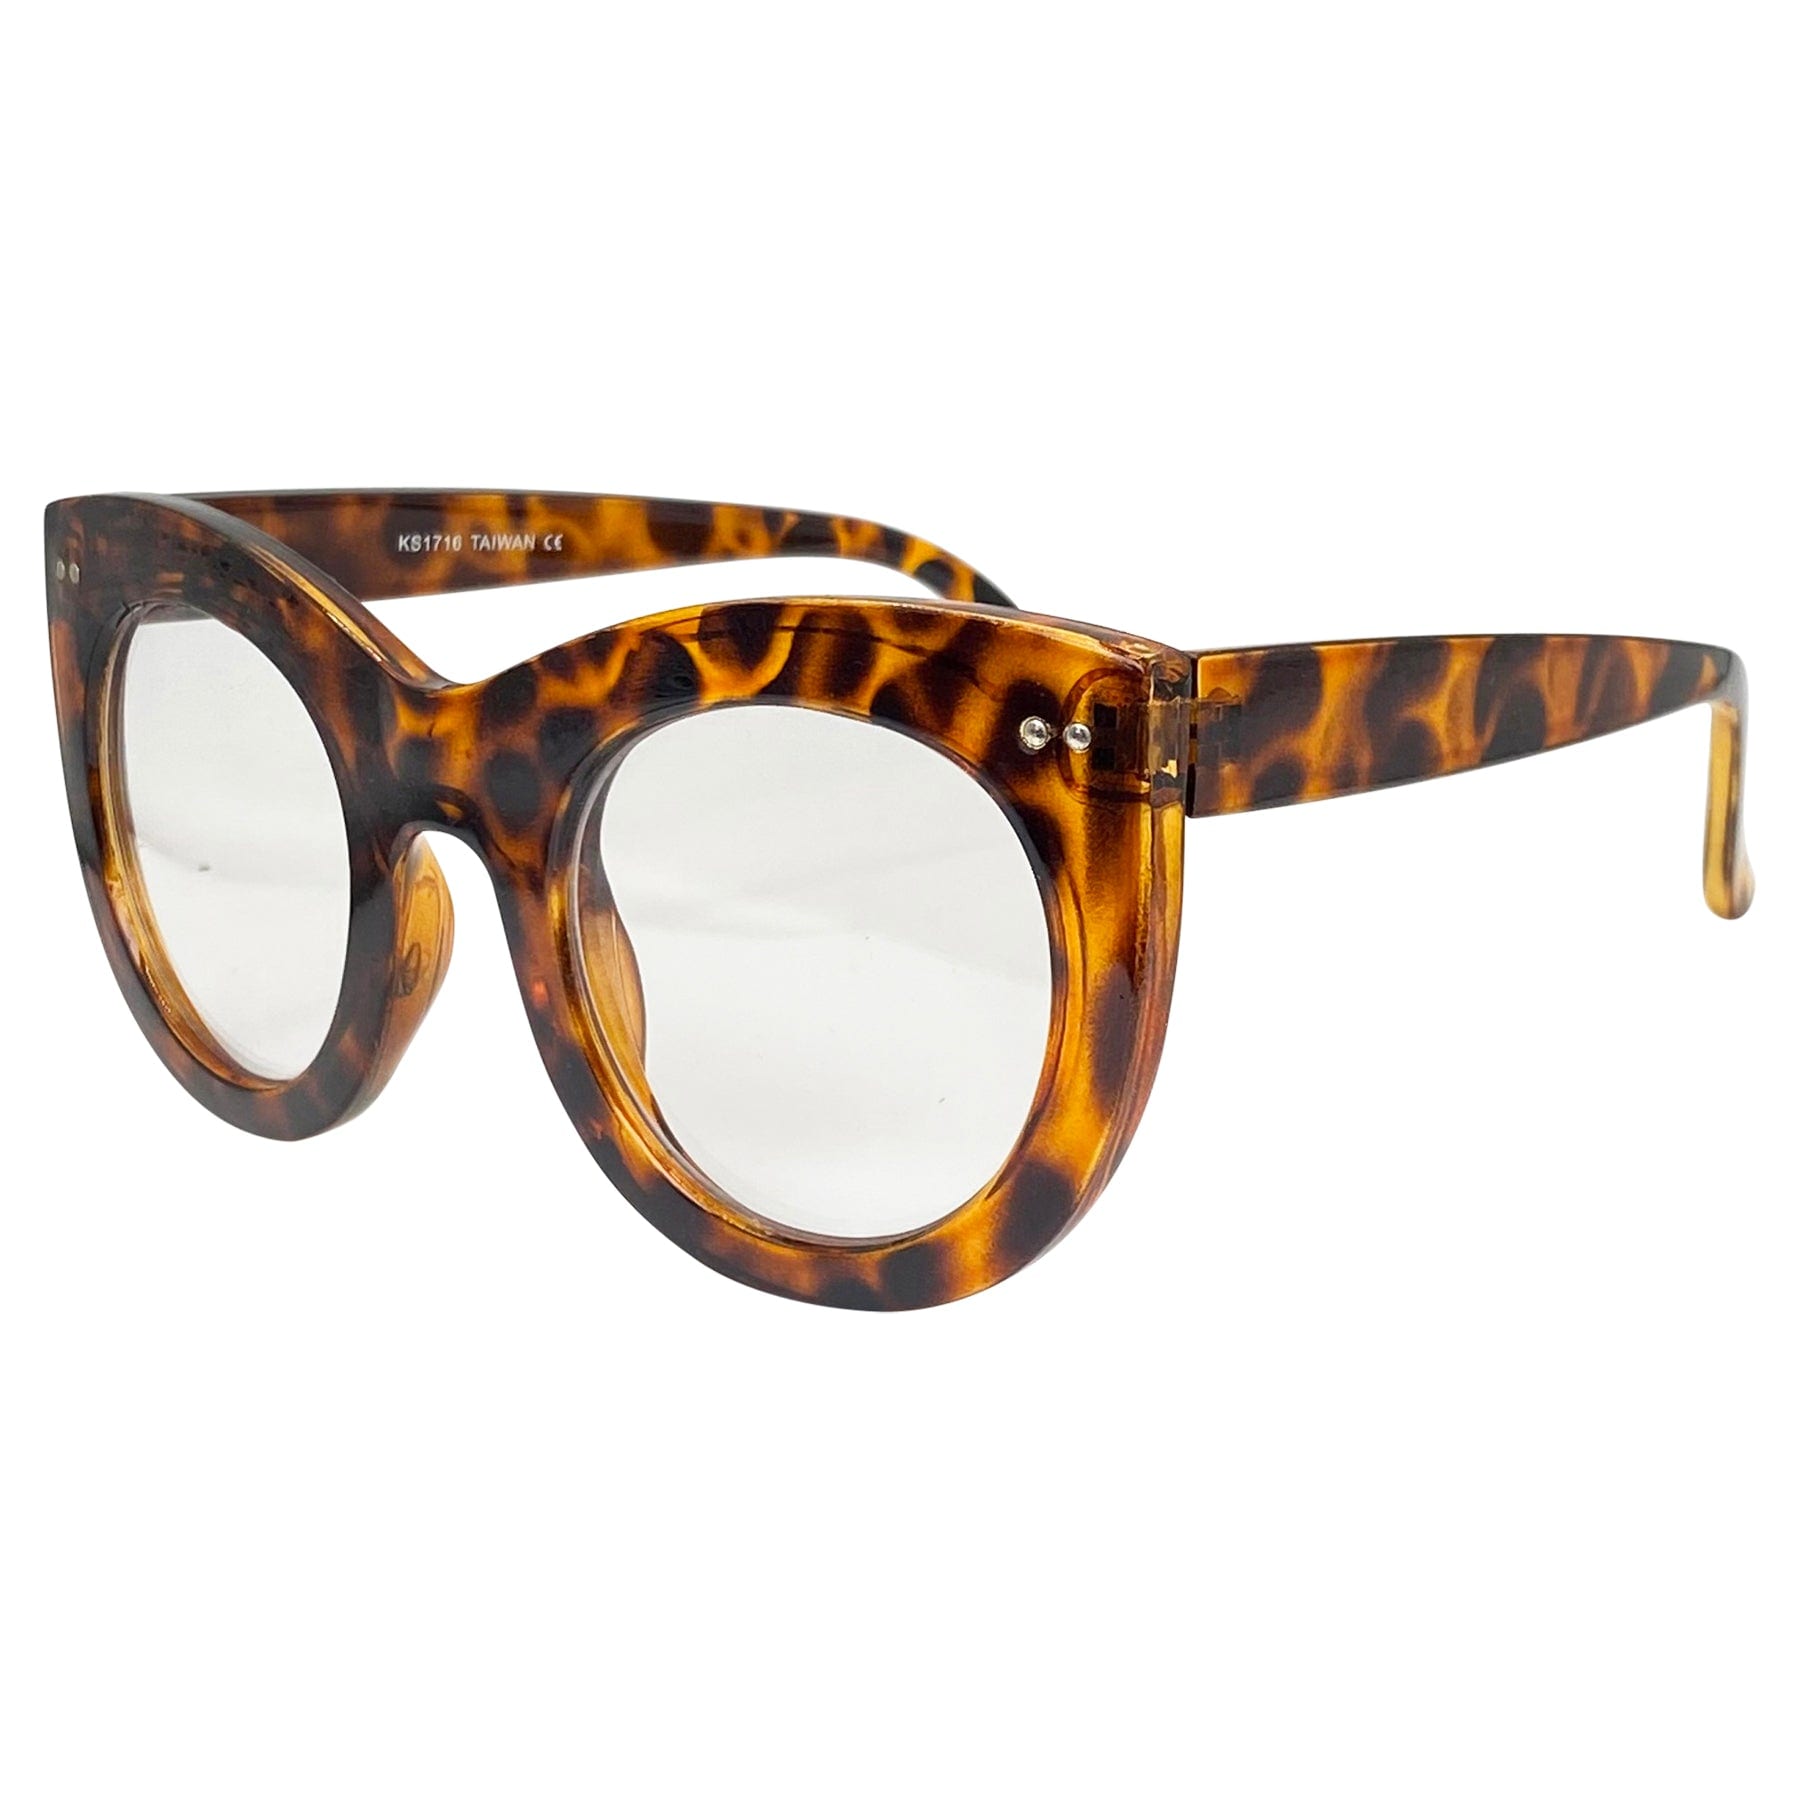 big glasses with a clear lens and cat eye shaped tortoise colored frame